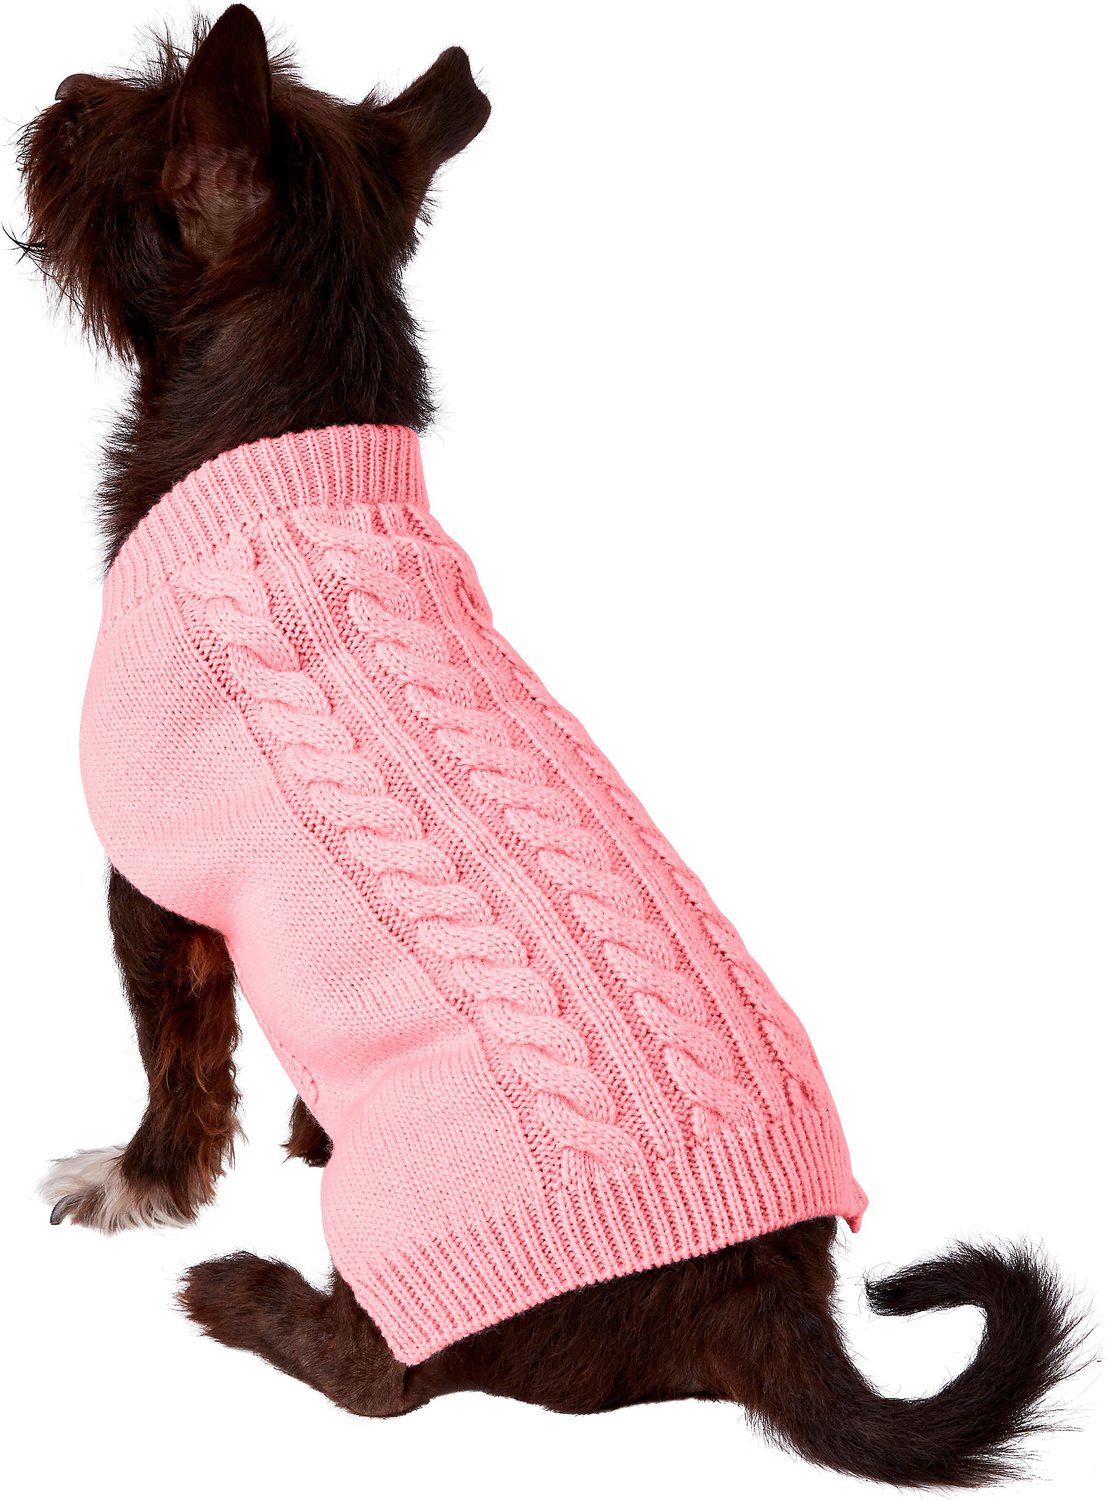 FRISCO Dog & Cat Cable Knitted Sweater, Light Pink, Medium - Chewy.com